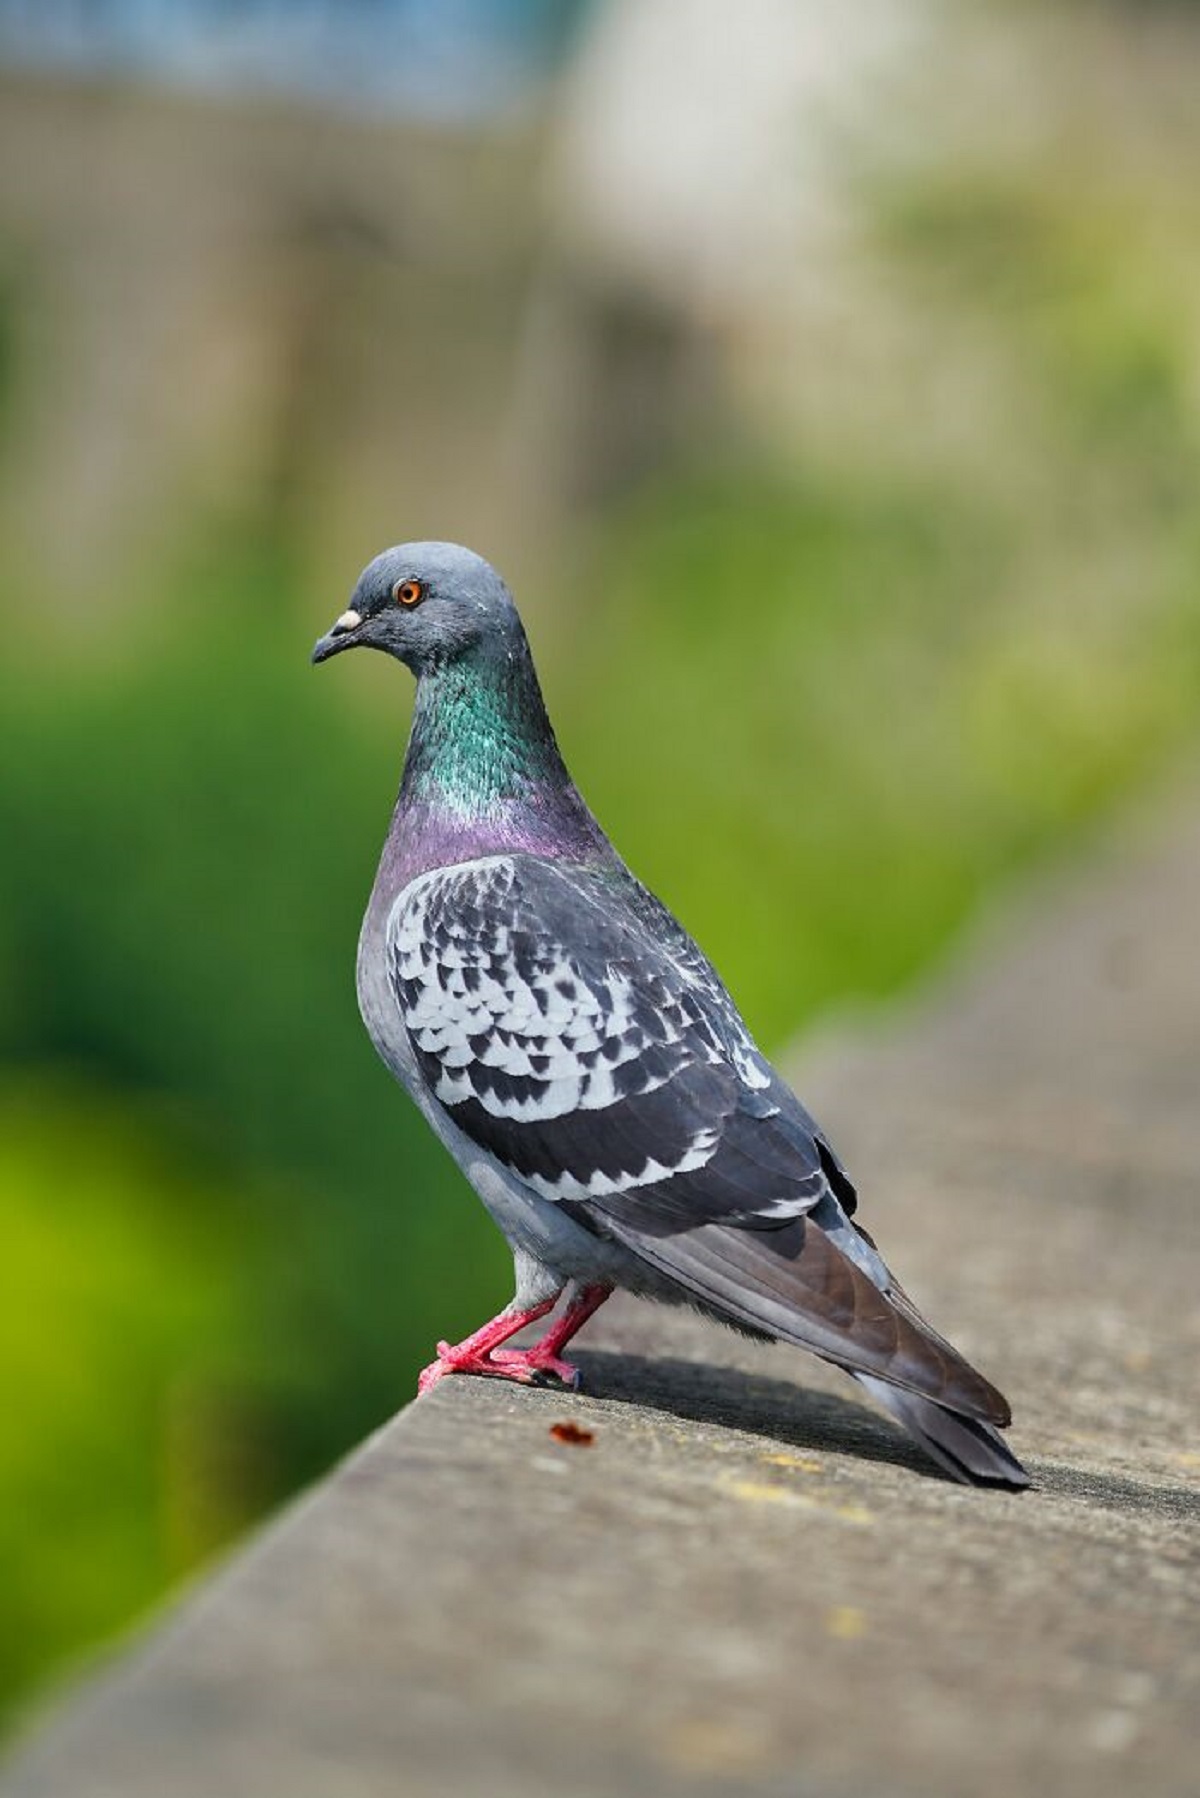 pigeon hd images download